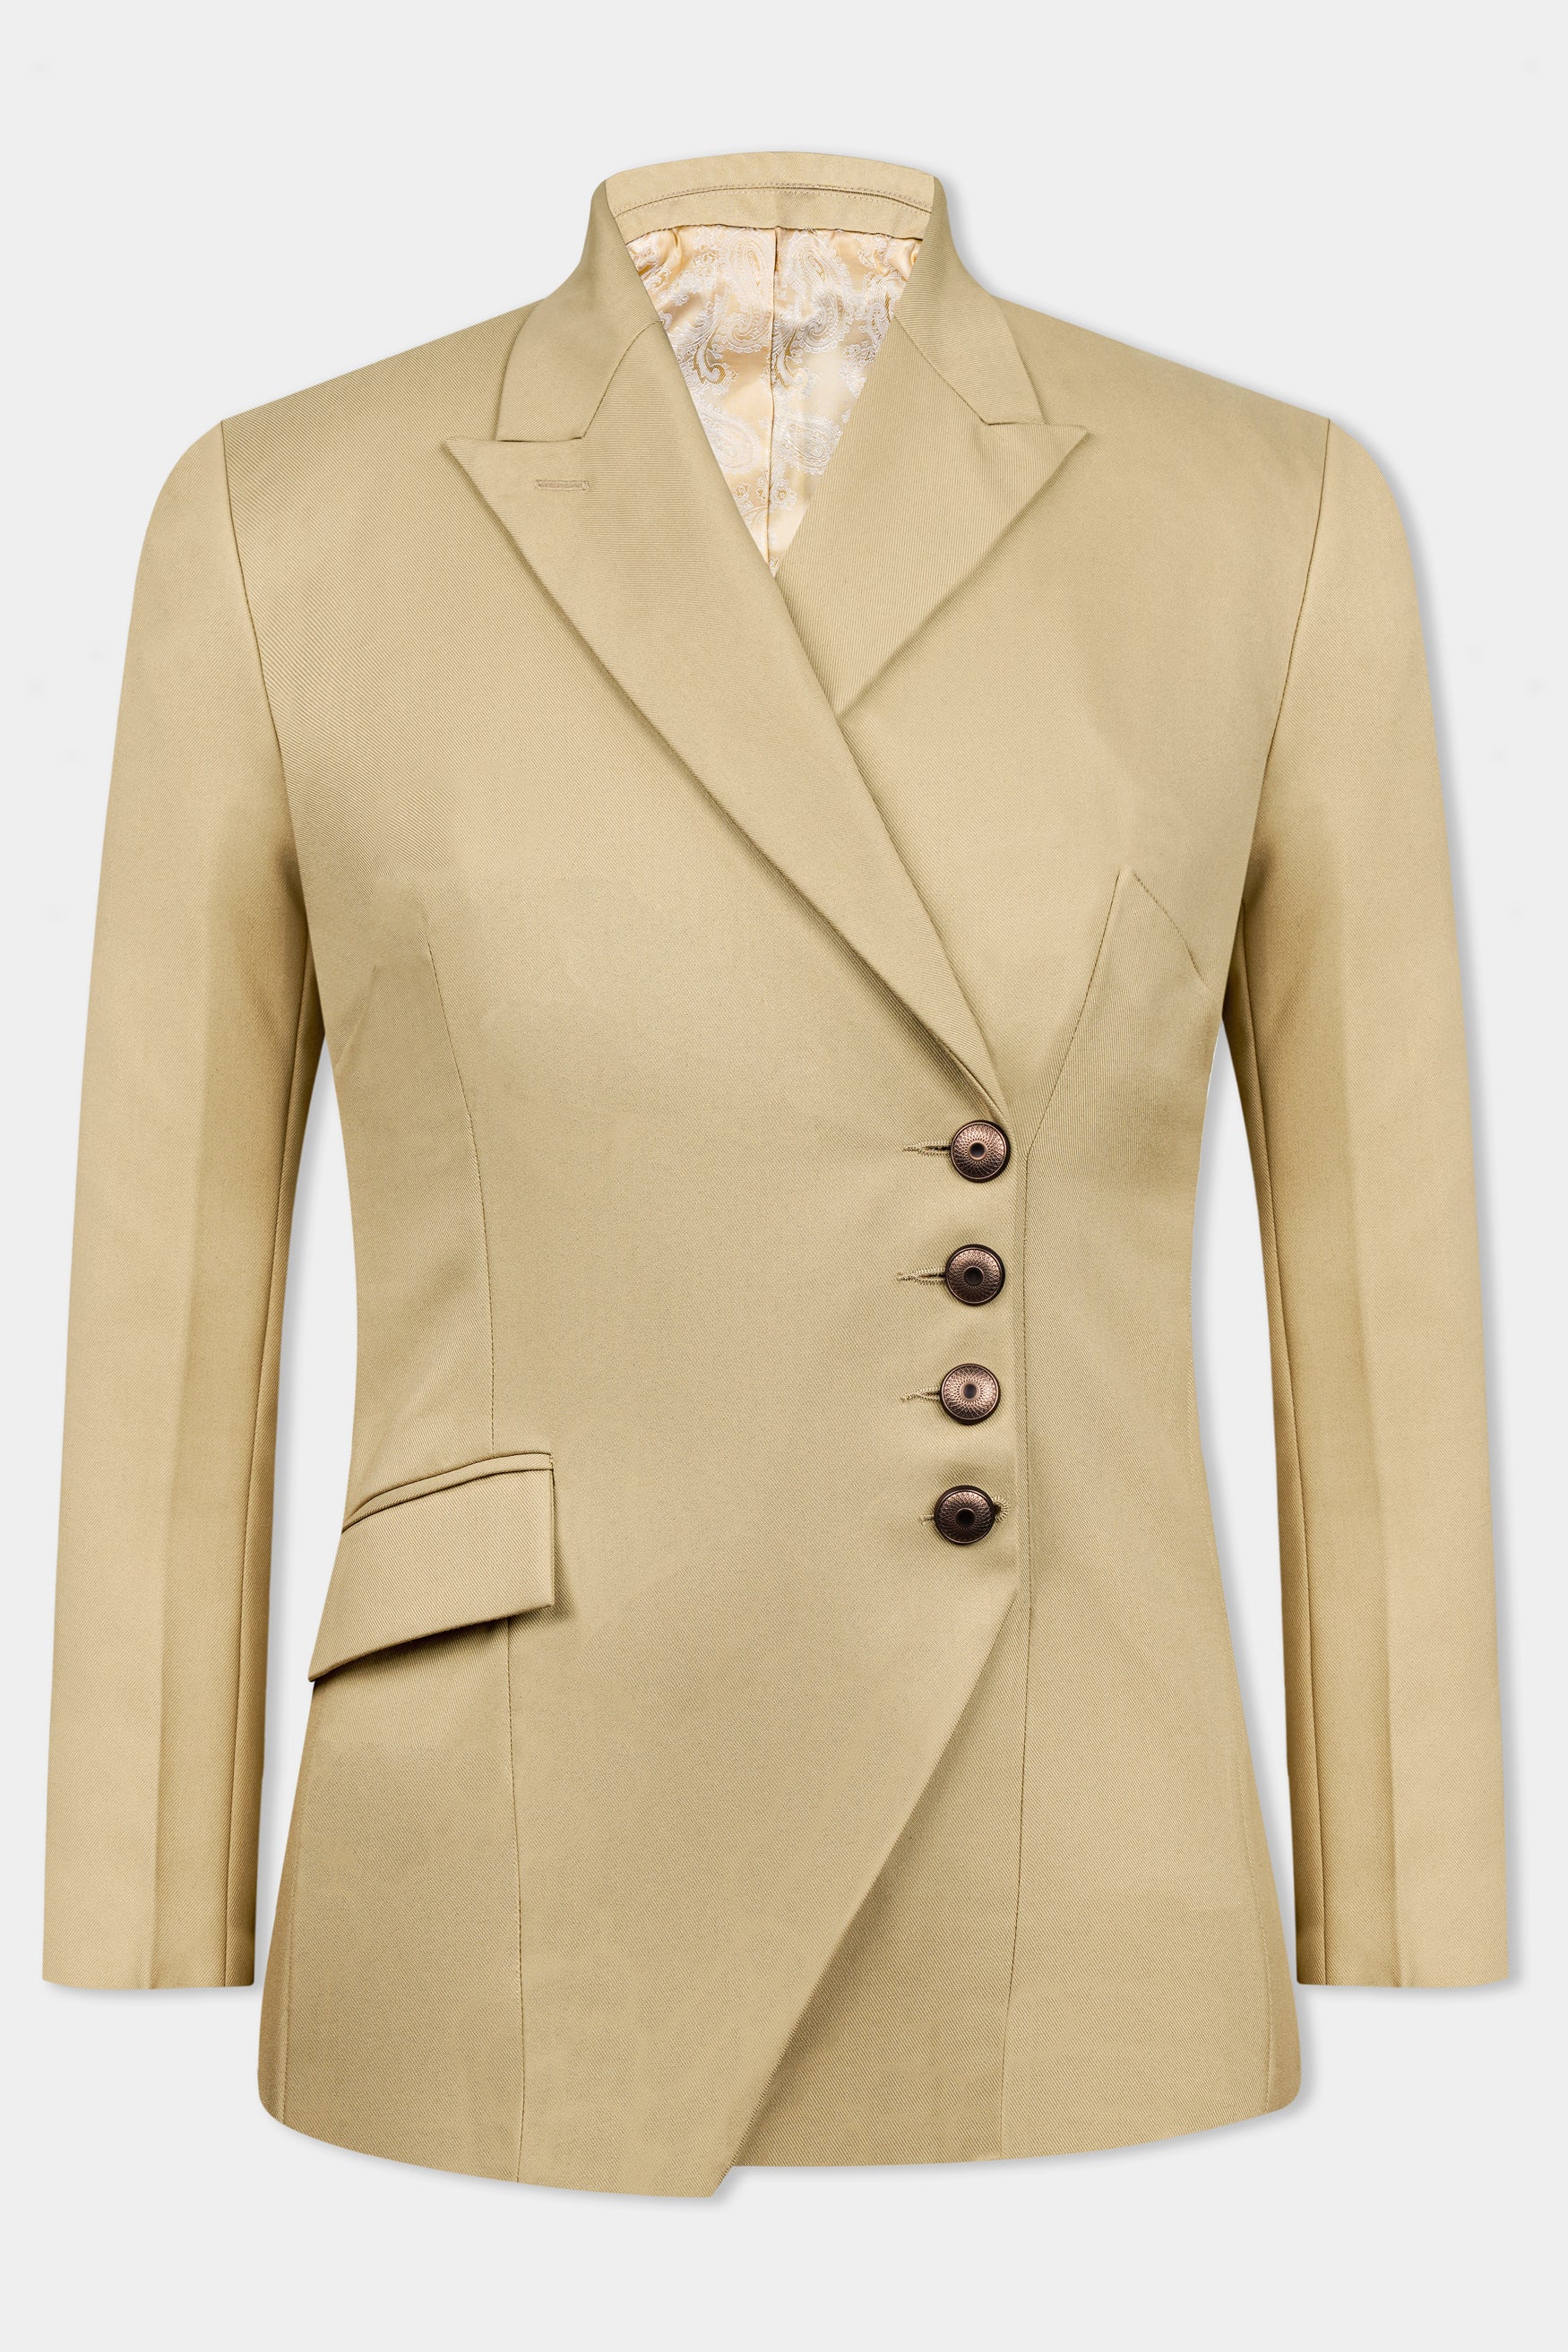 Cashmere Cream Wool Rich Double Breasted Women’s Designer Suit